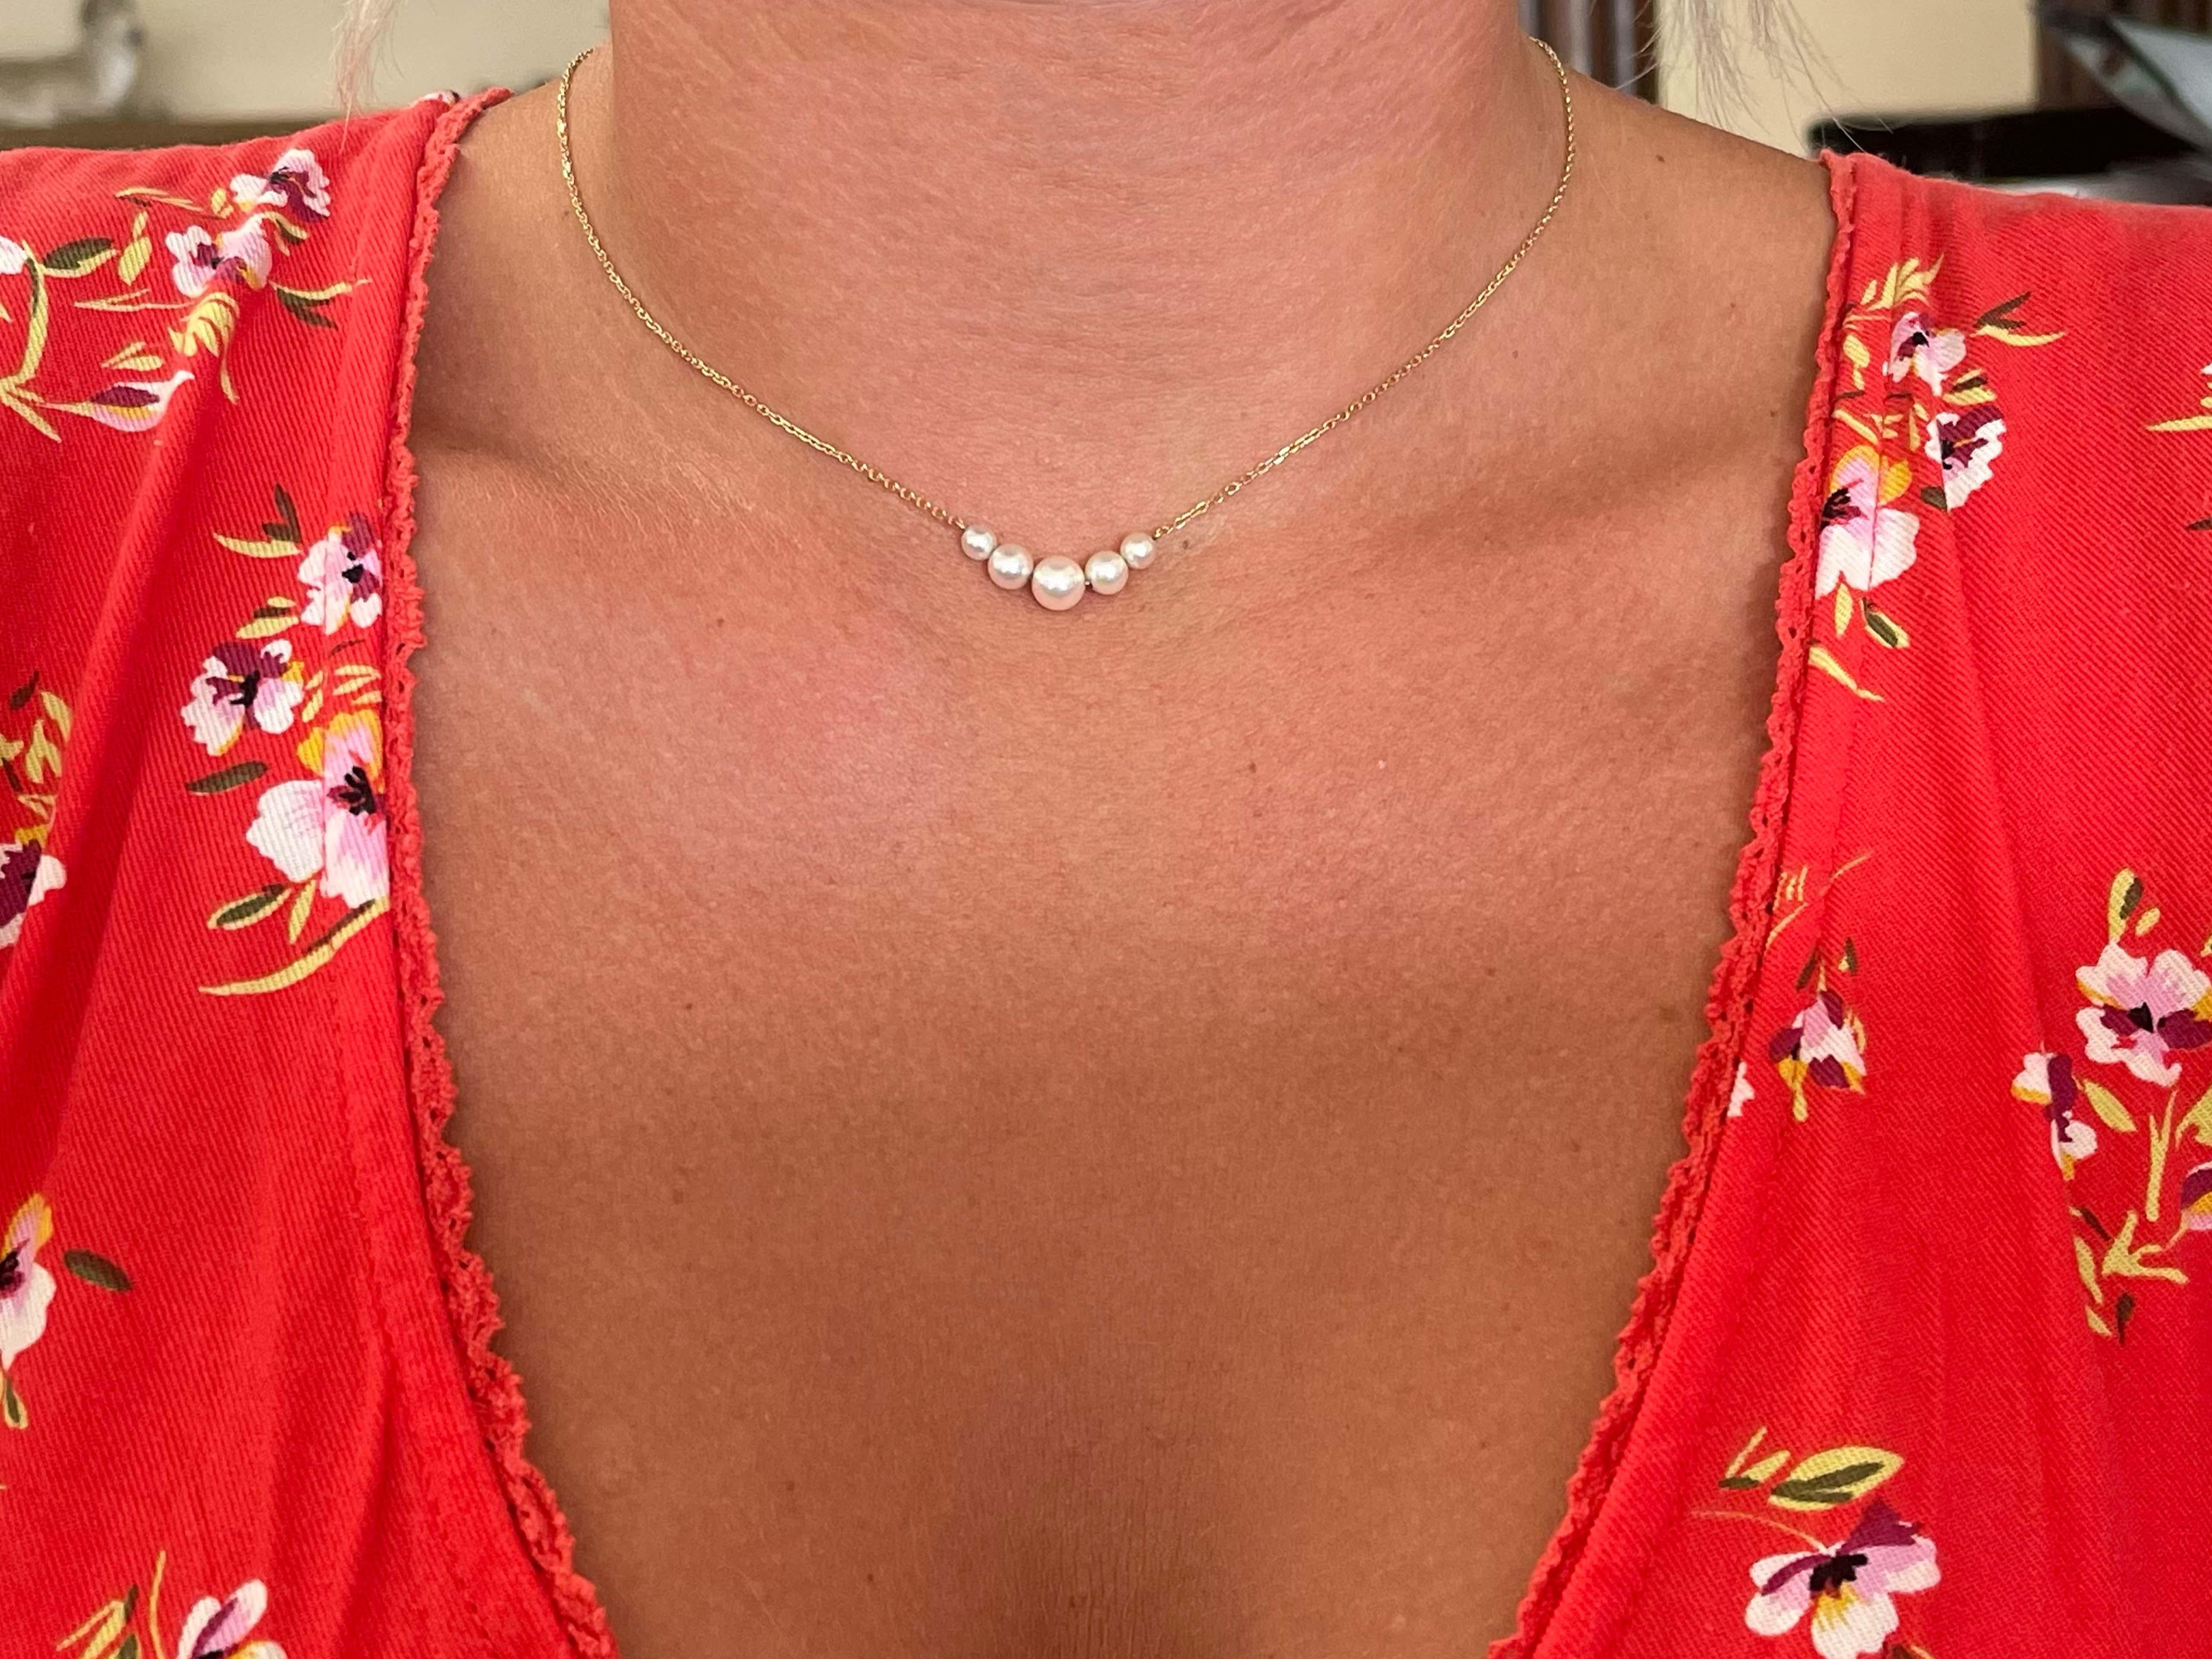 This classic pearl necklace makes any outfit look outstanding. Set with 5 grade A Akoya pearls, this is a simple piece that pairs well with any occasion. The piece comes on a 14